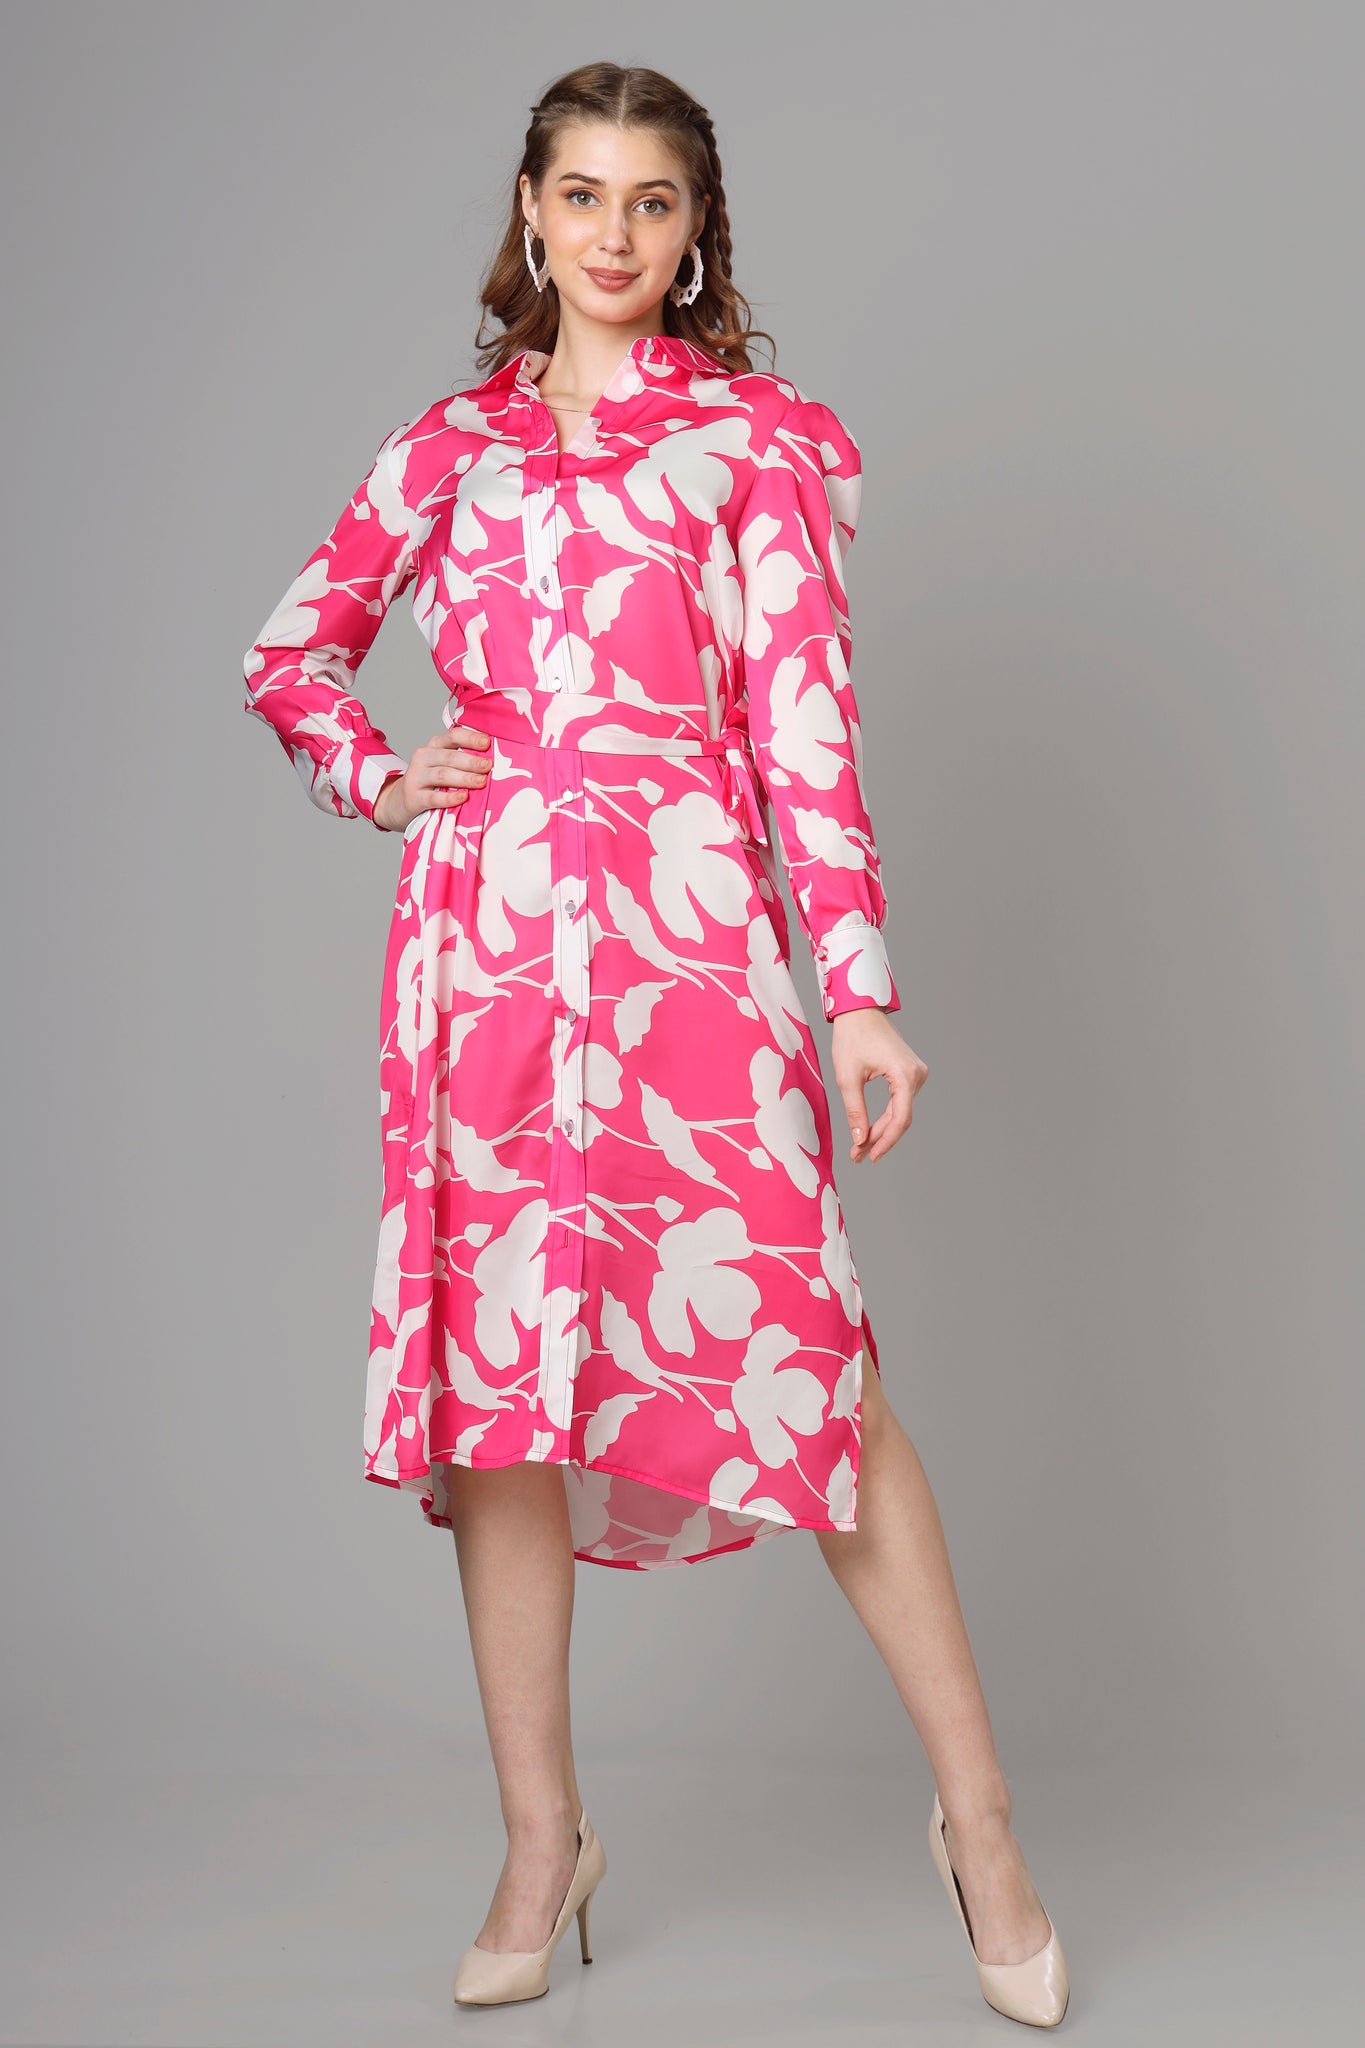 Attractive Pink Floral Dress For Women